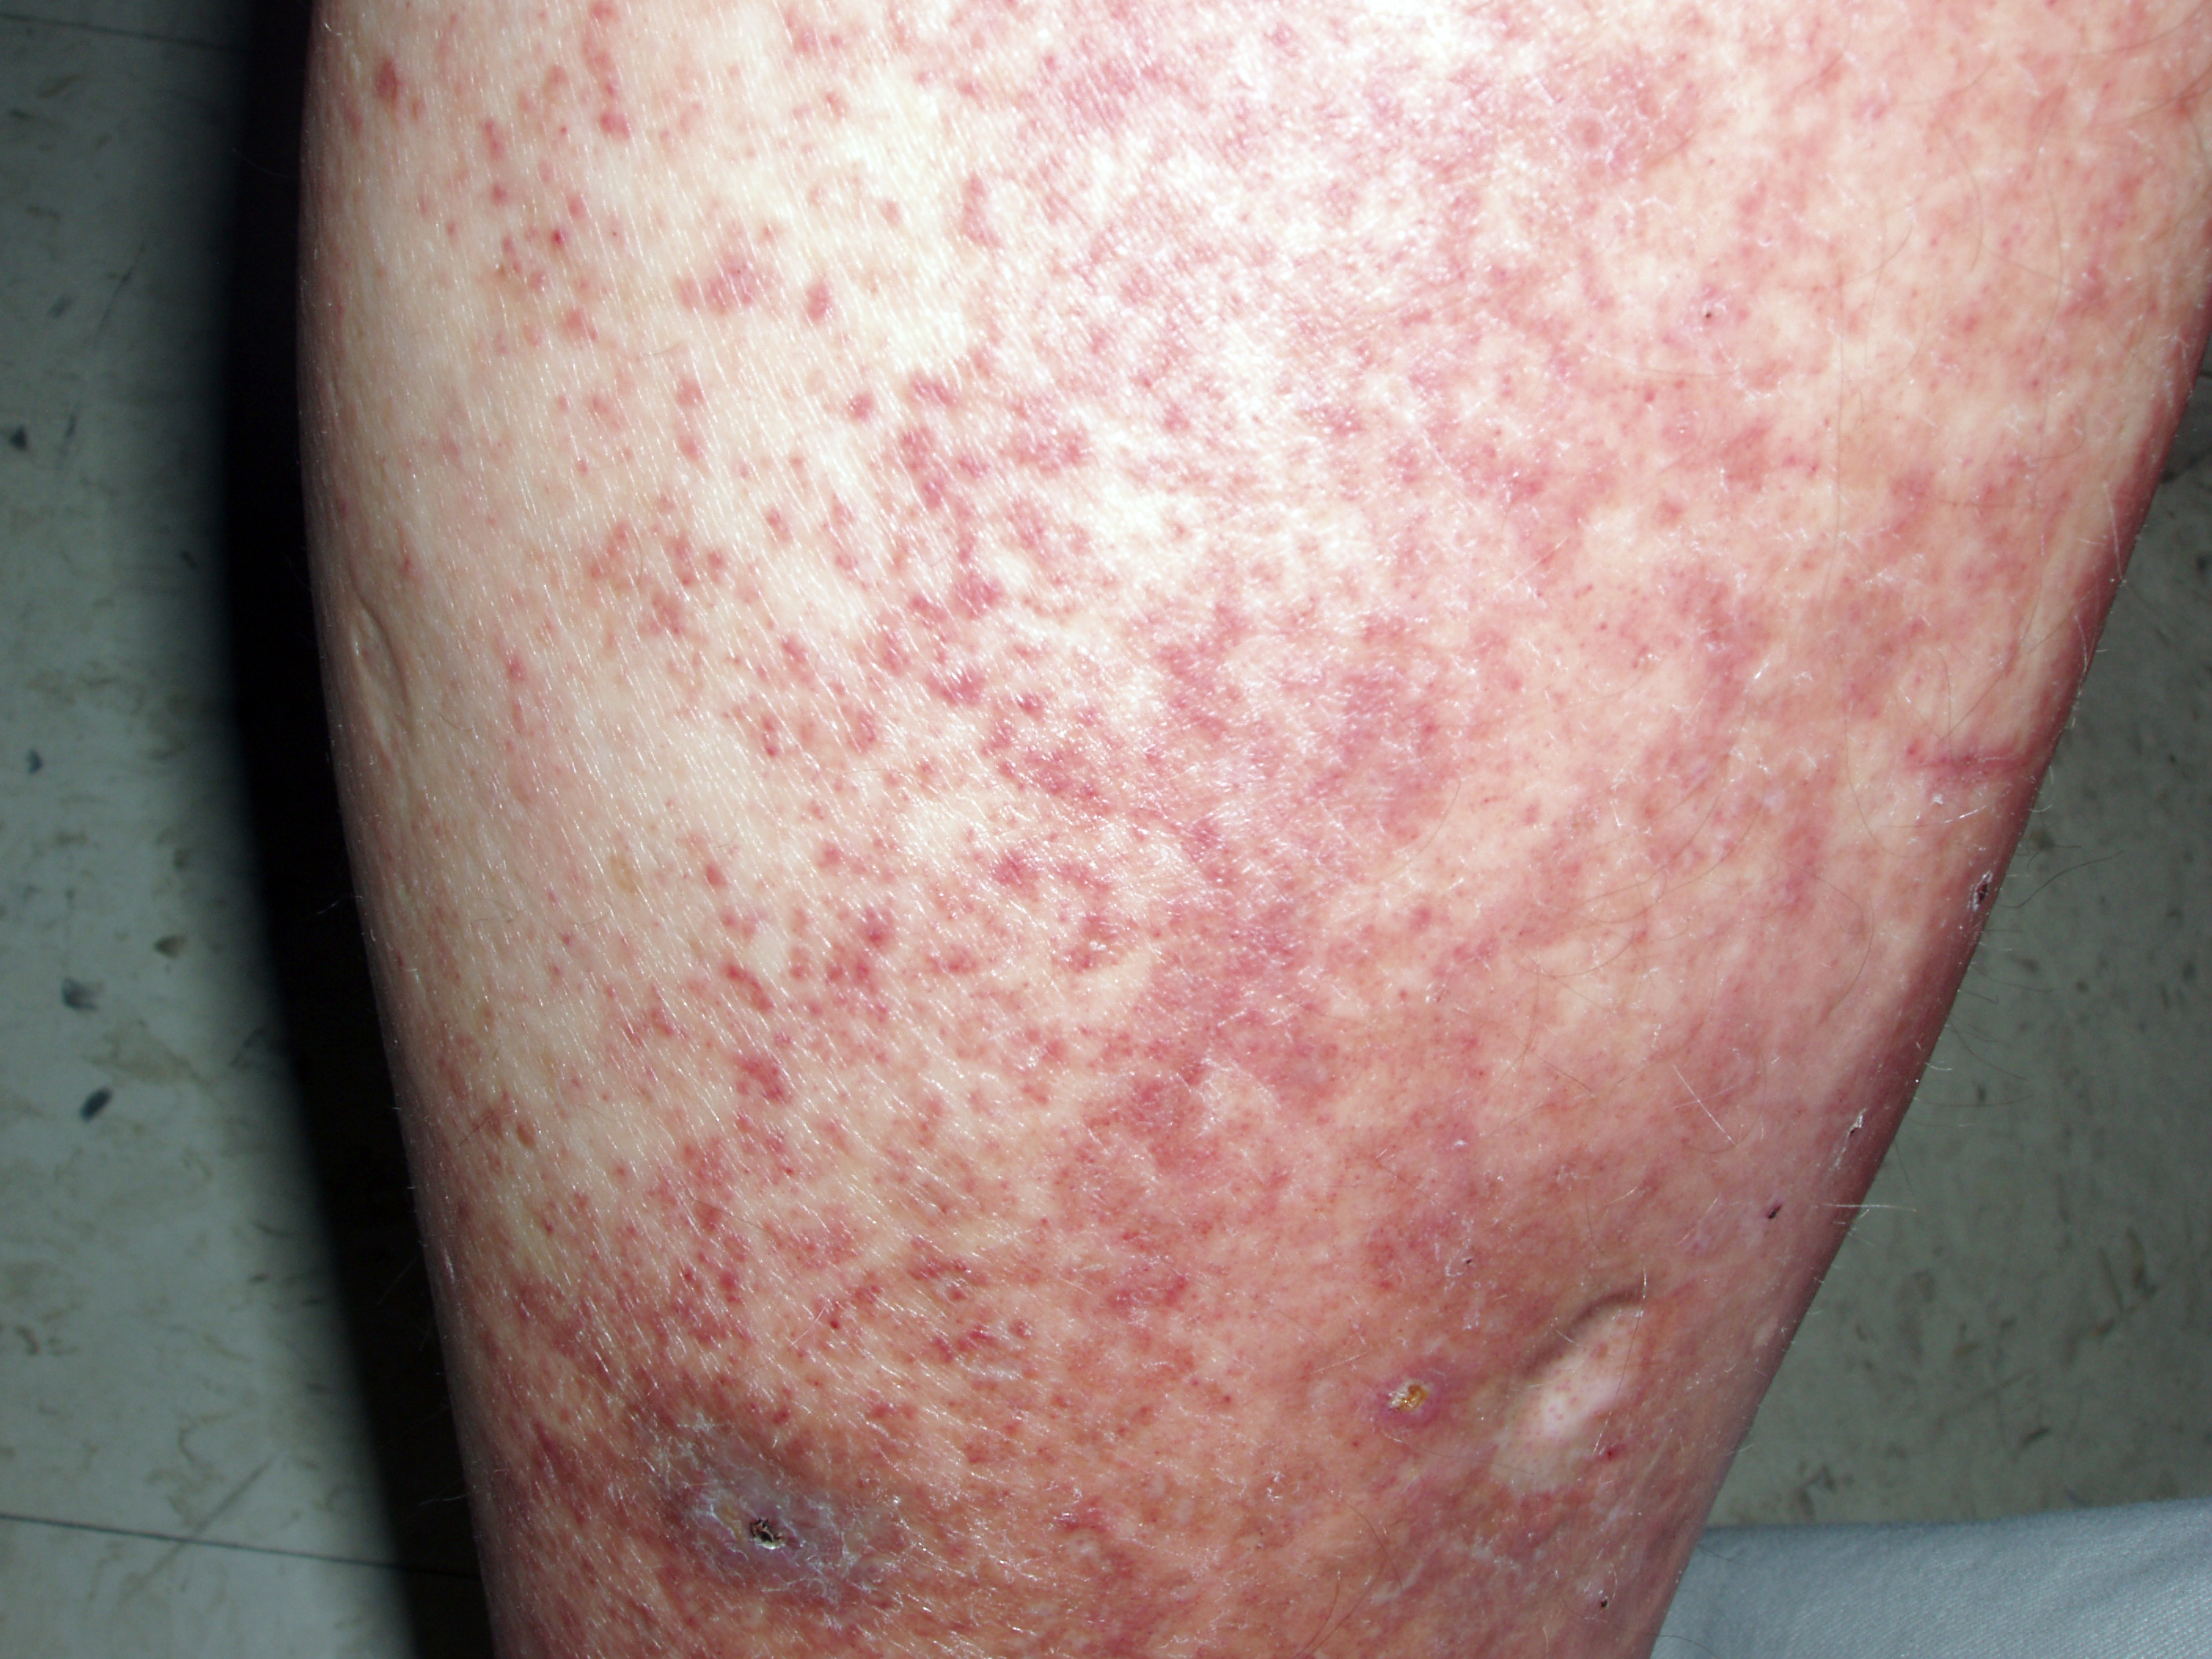 Vasculitis: In this instance, idiopathic with palpable purpura.